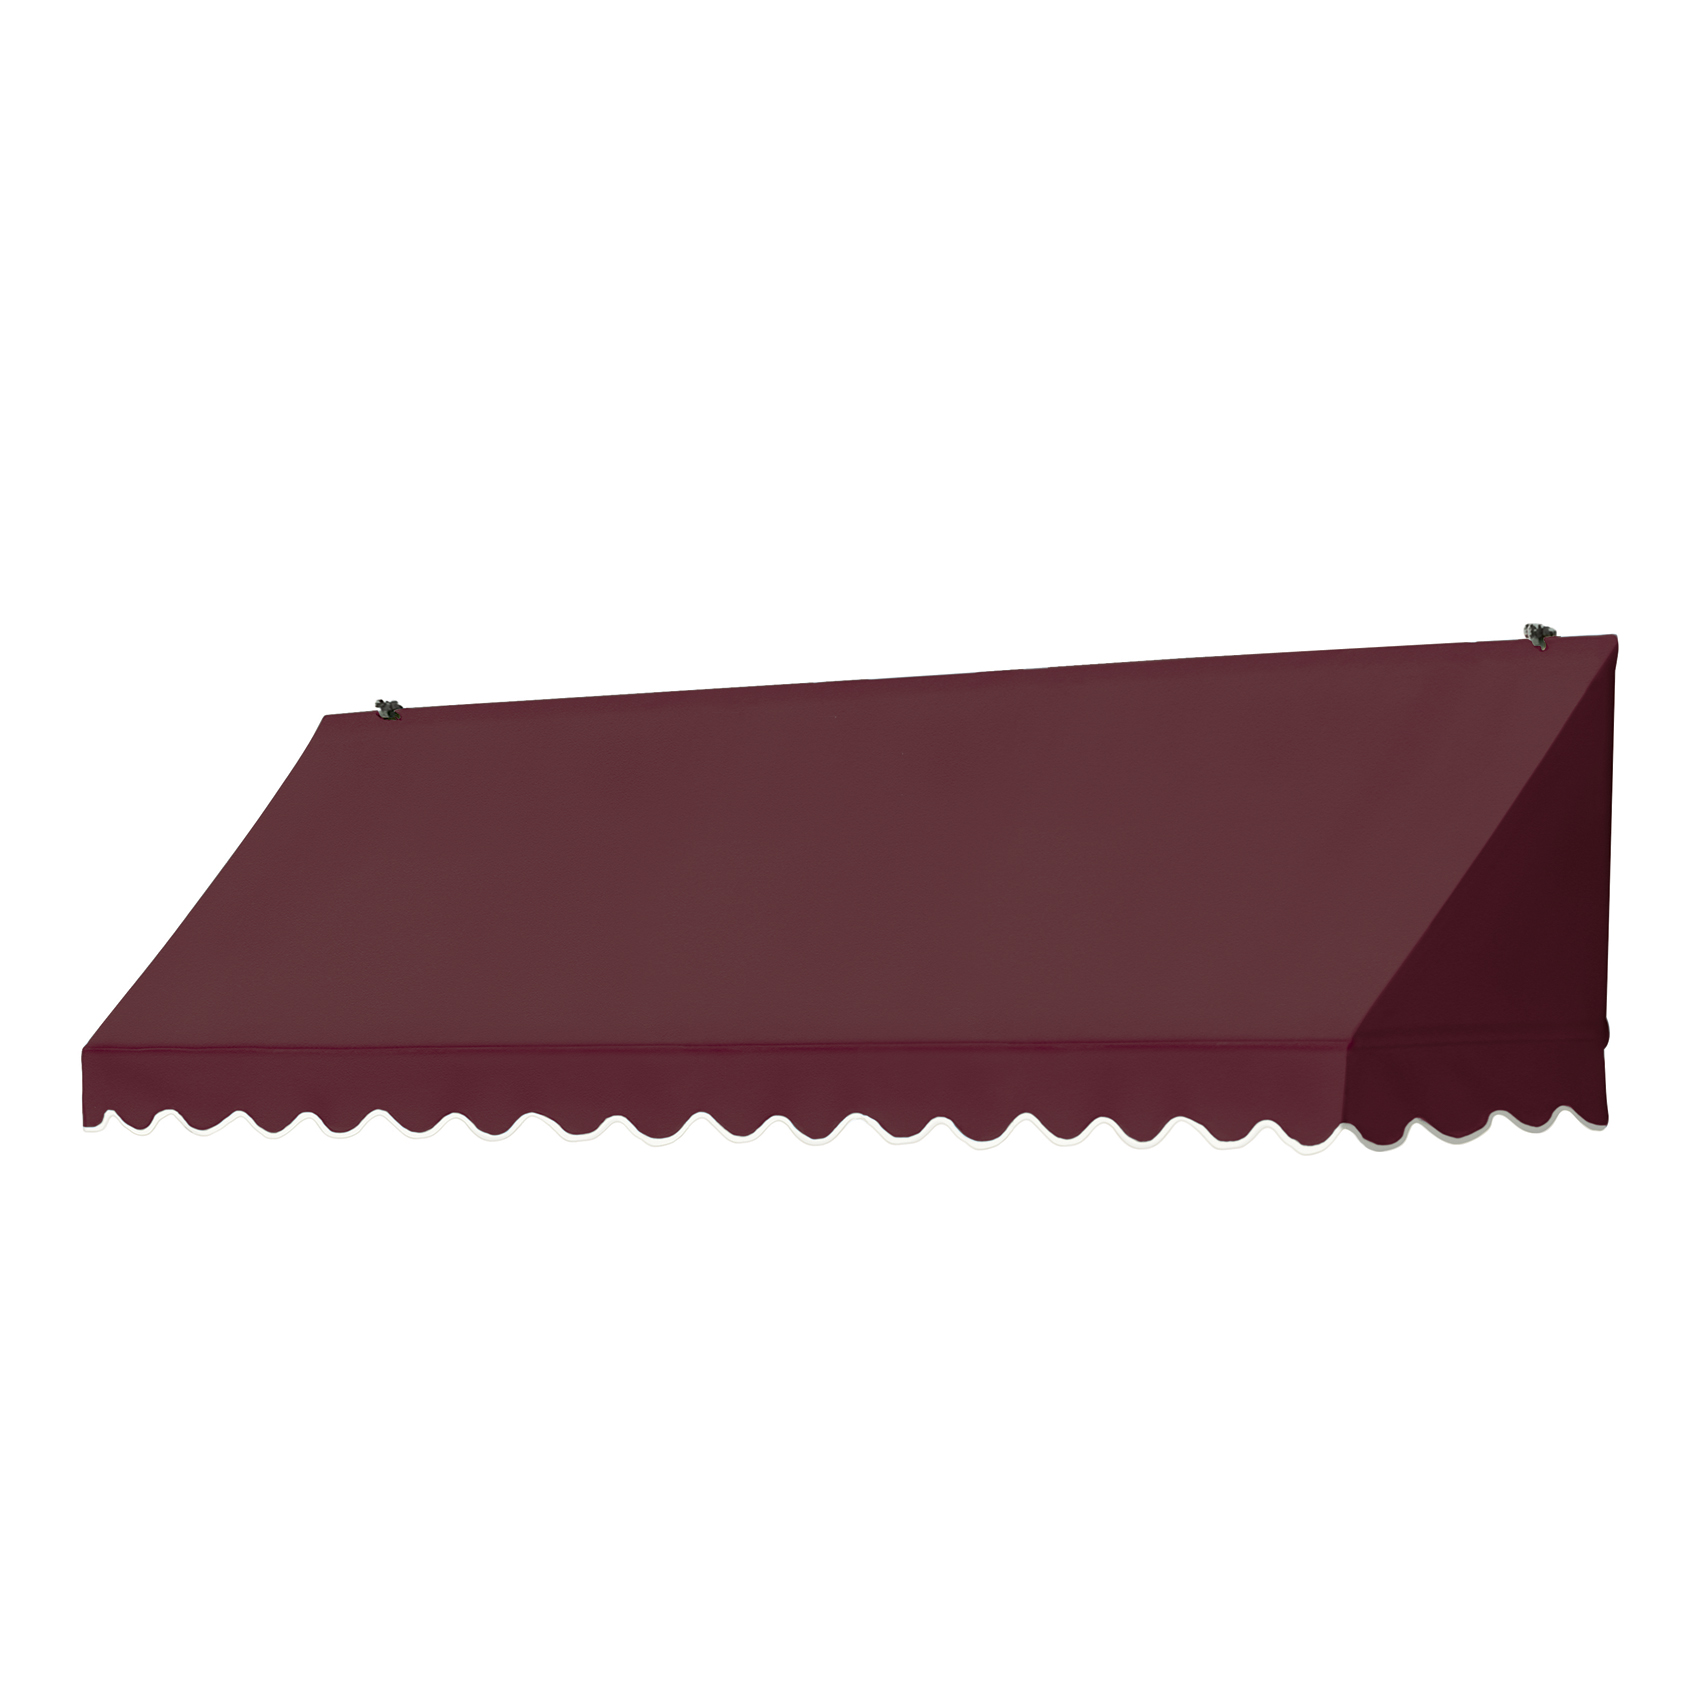 Awnings in a Box&reg;; 8' Traditional Style Awning in Assorted Colors